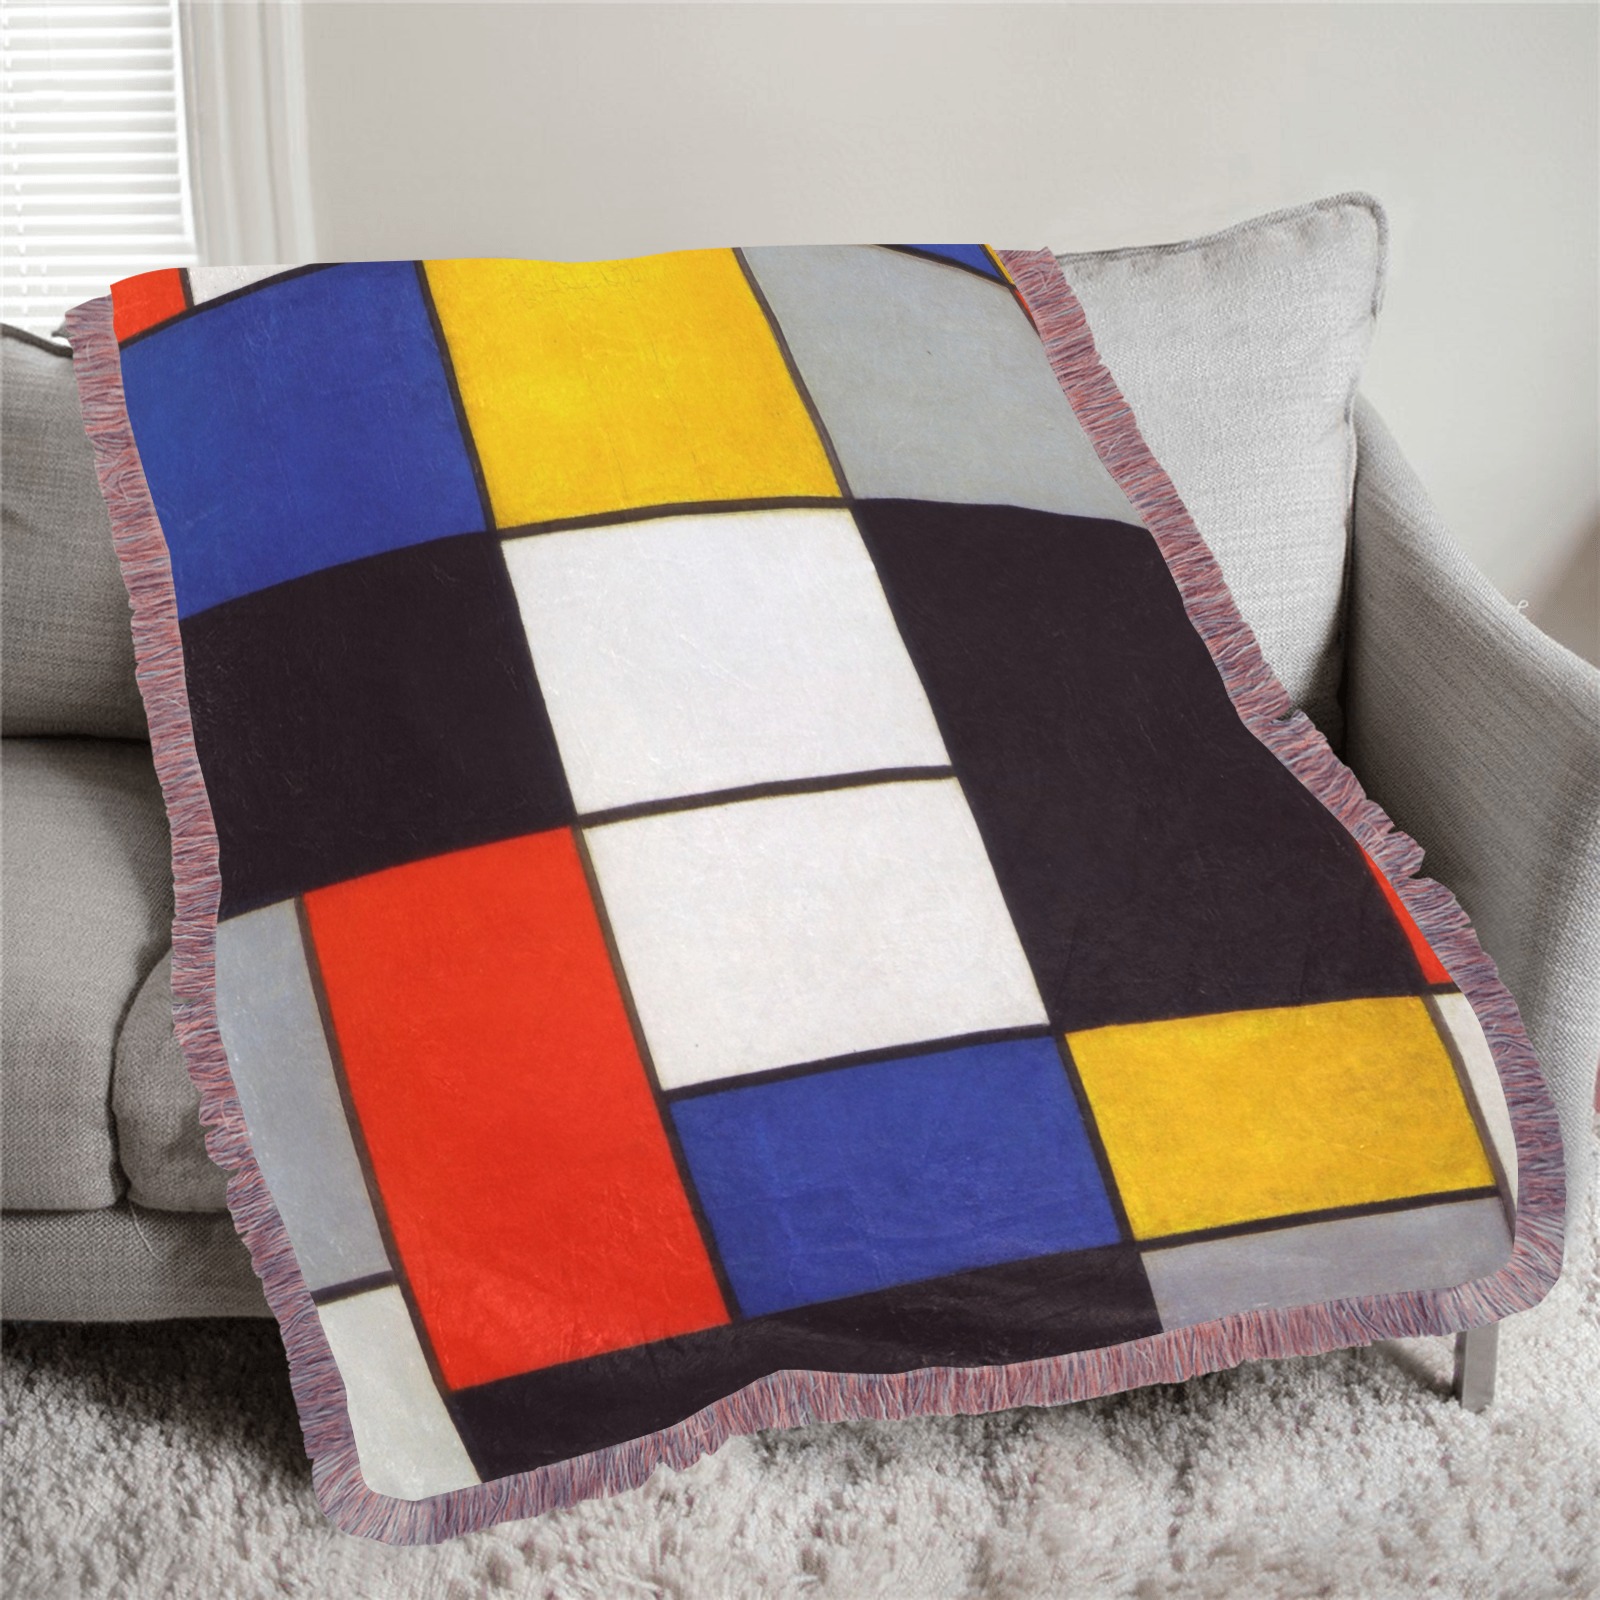 Composition A by Piet Mondrian Ultra-Soft Fringe Blanket 40"x50" (Mixed Pink)